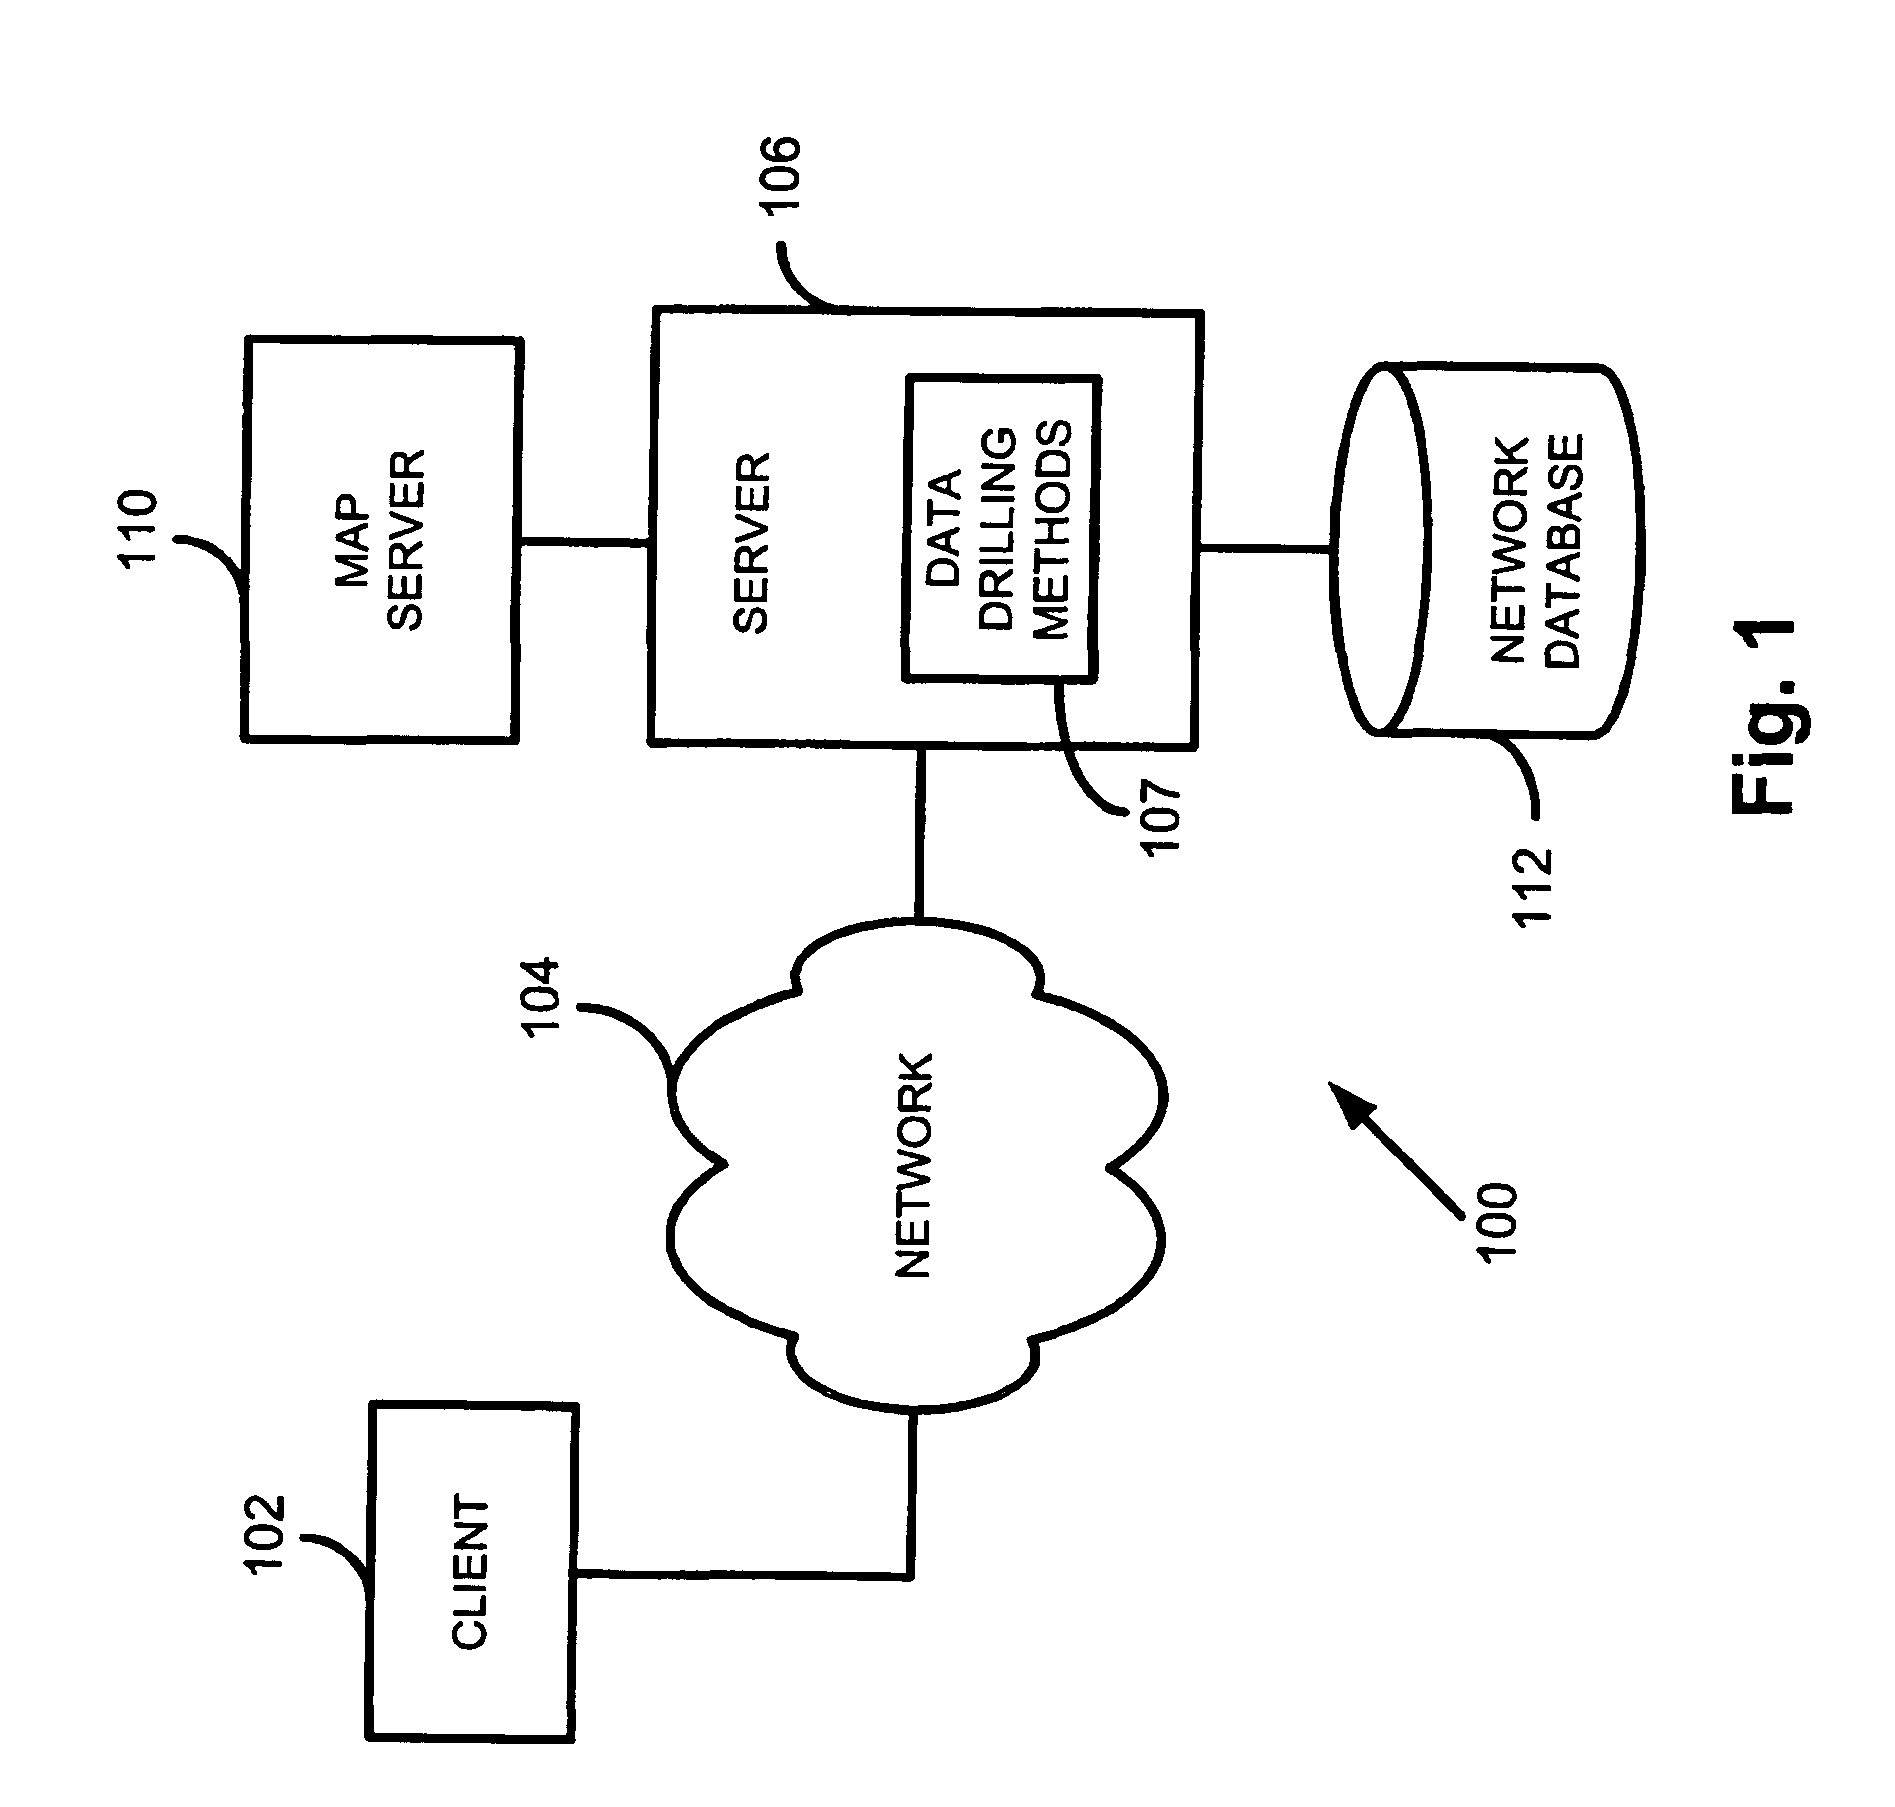 Method for web-based exploration of network infrastructure